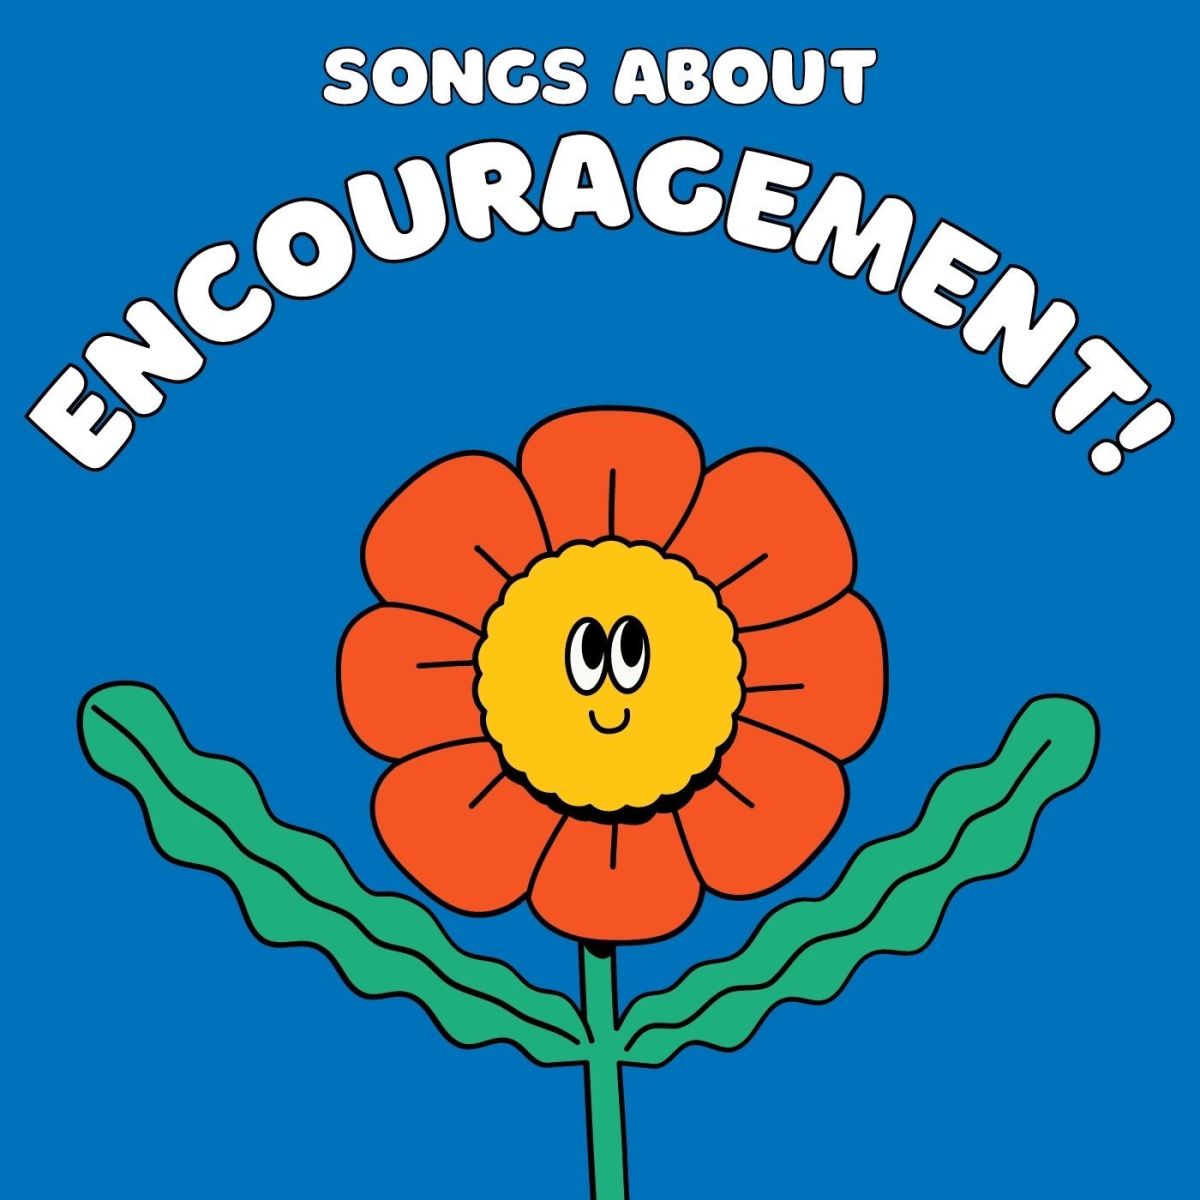 10 Songs About Encouragement